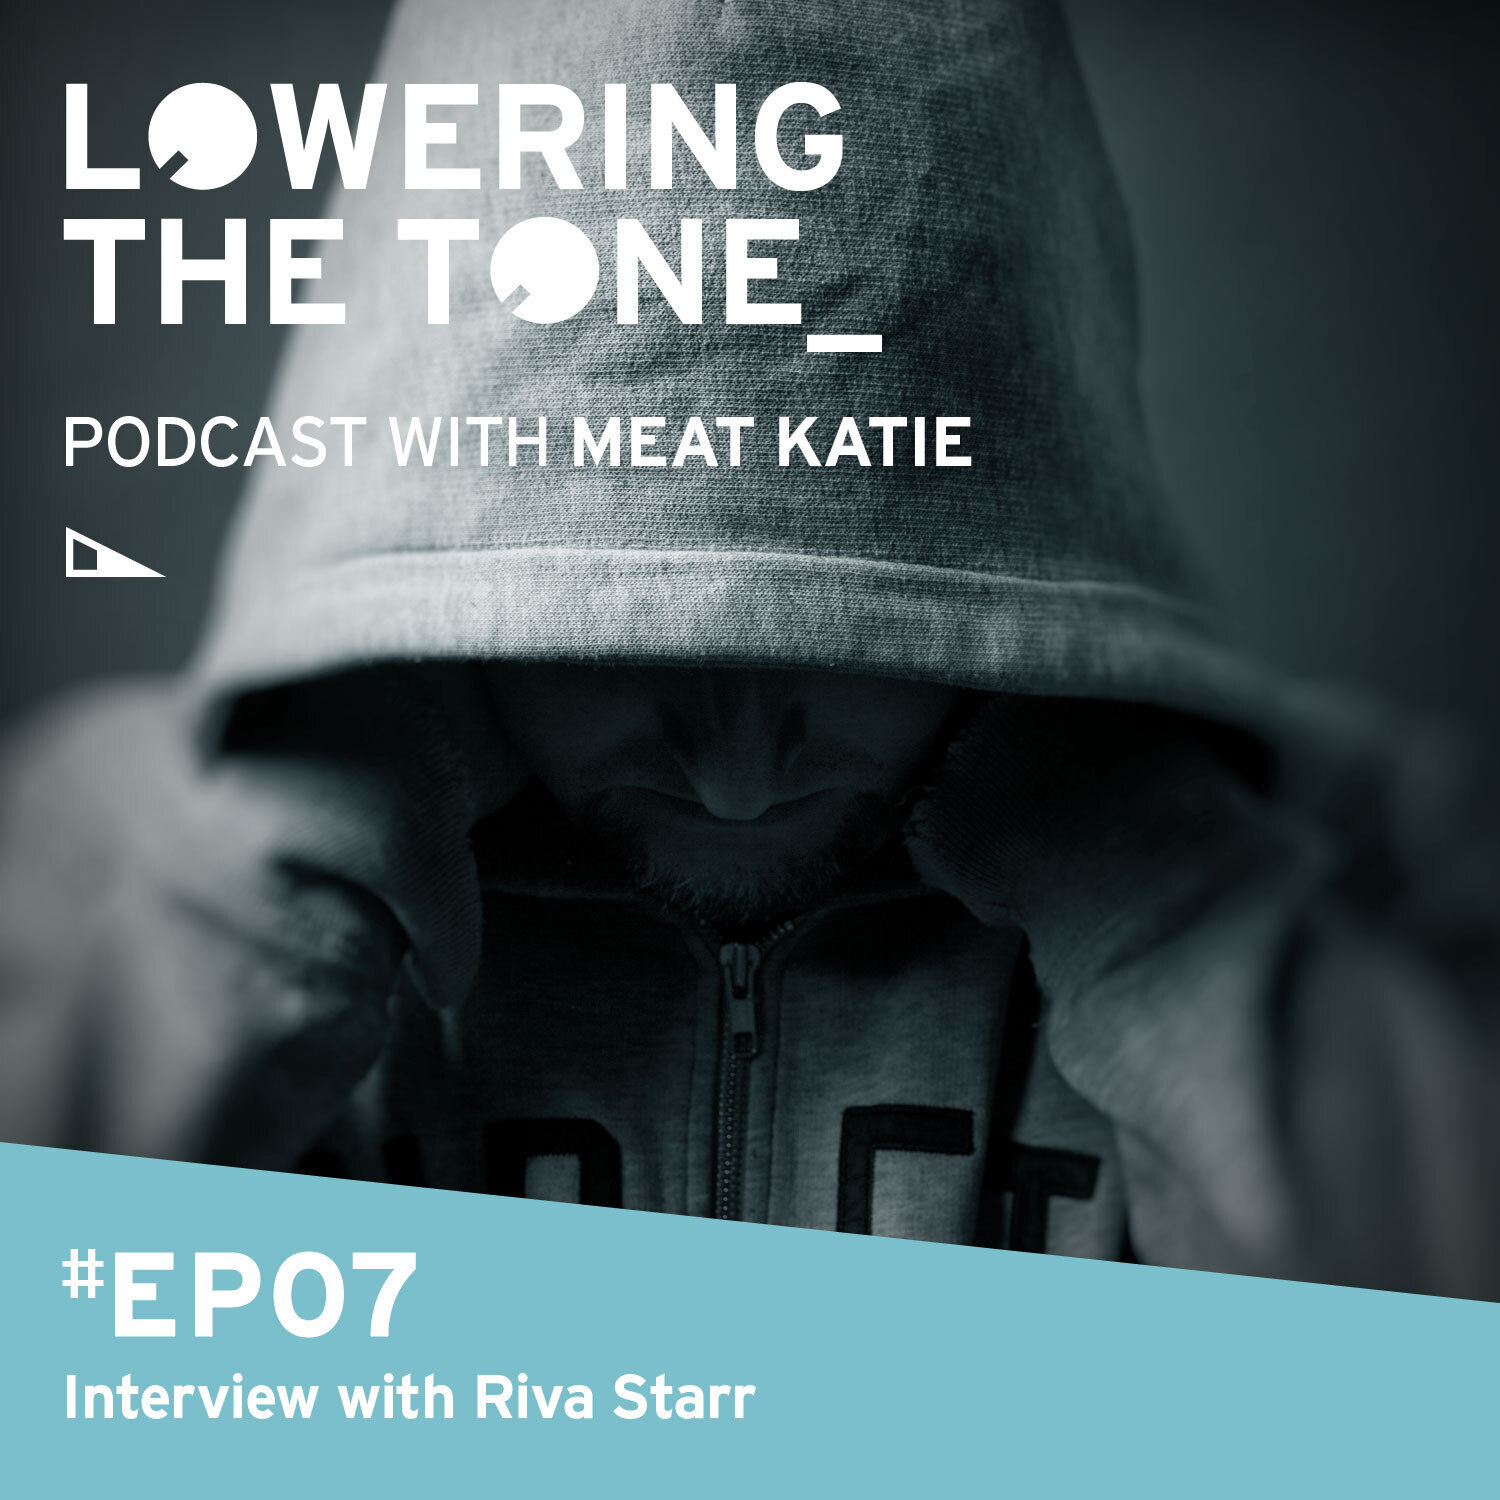 Meat Katie ’Lowering The Tone’ Episode 7 - (Interview with Riva Starr)